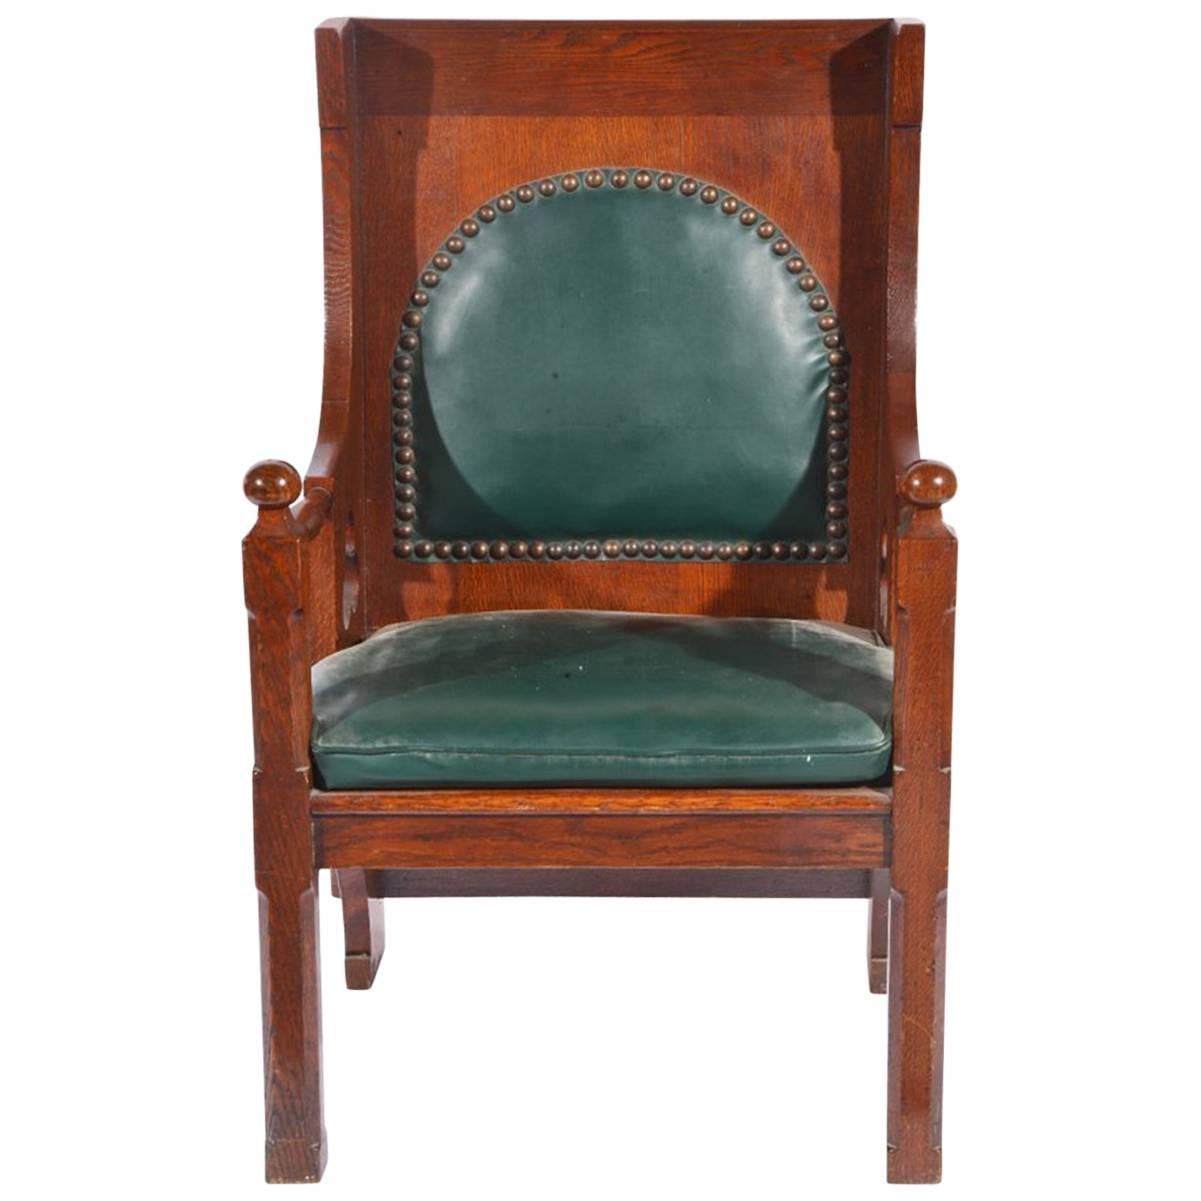 Liberty and Co. A Good Quality Arts and Crafts Oak Armchair.